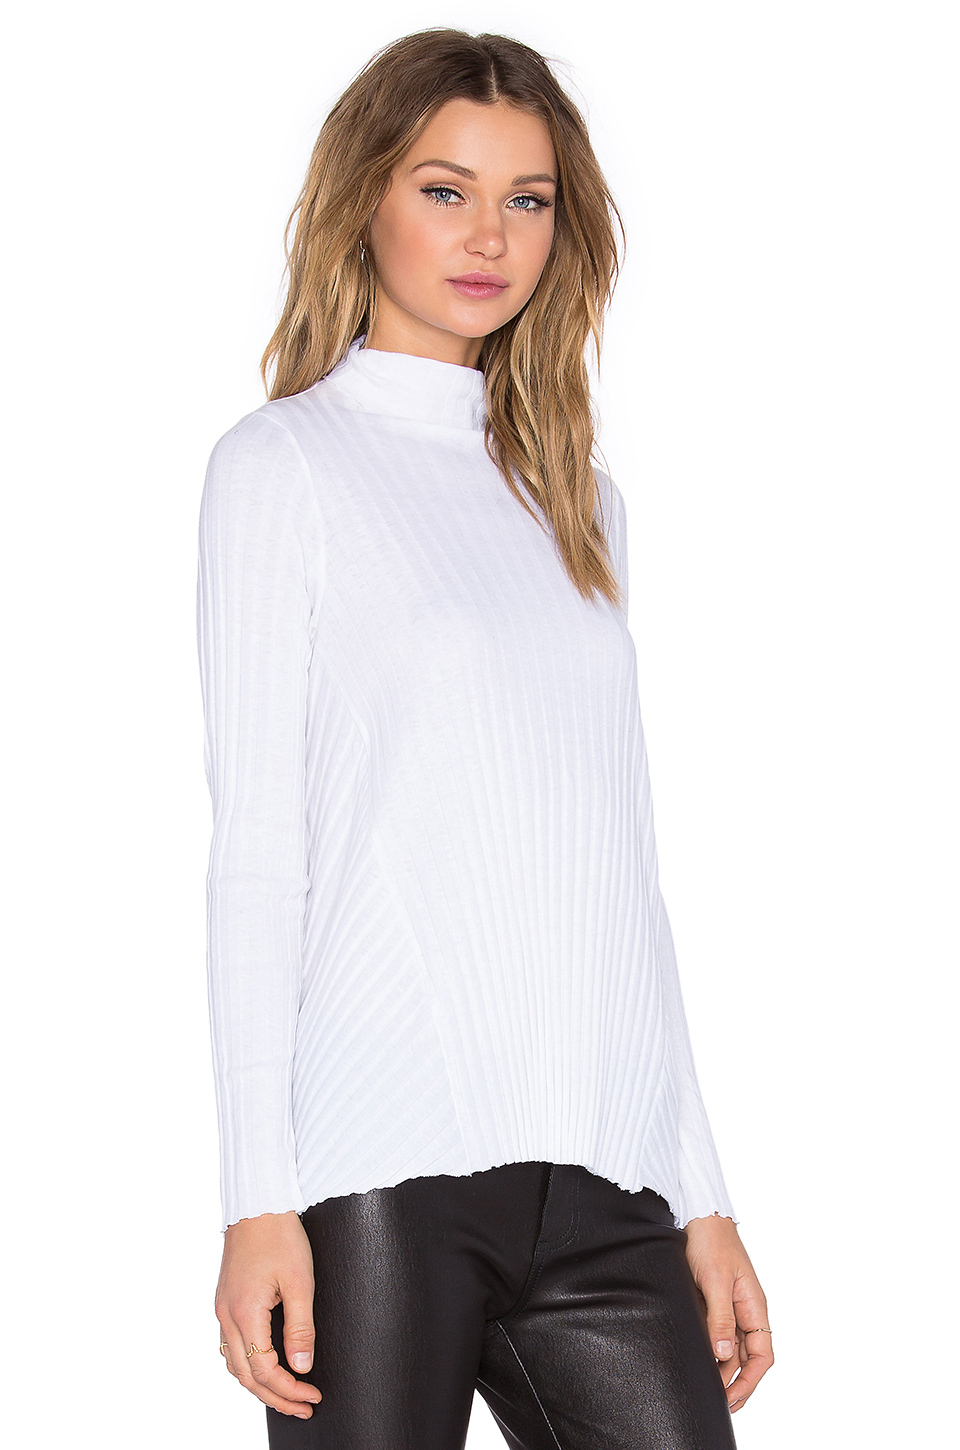 Lyst - Enza Costa Cashmere Flare Long Sleeve Turtleneck Sweater in White